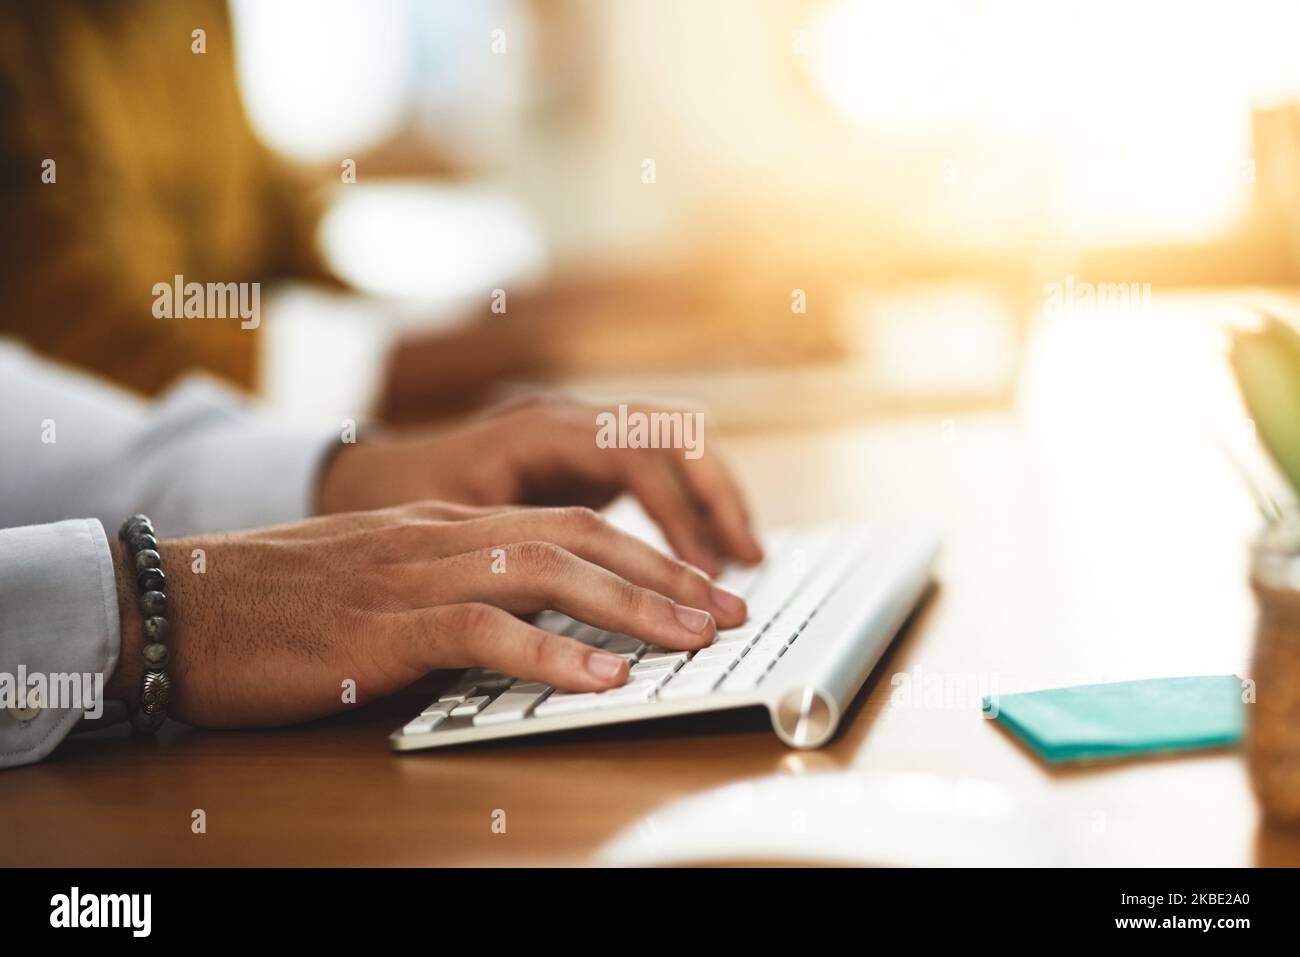 Always connected. Always online. Always ready to help. an unrecognizable man typing on a keyboard. Stock Photo